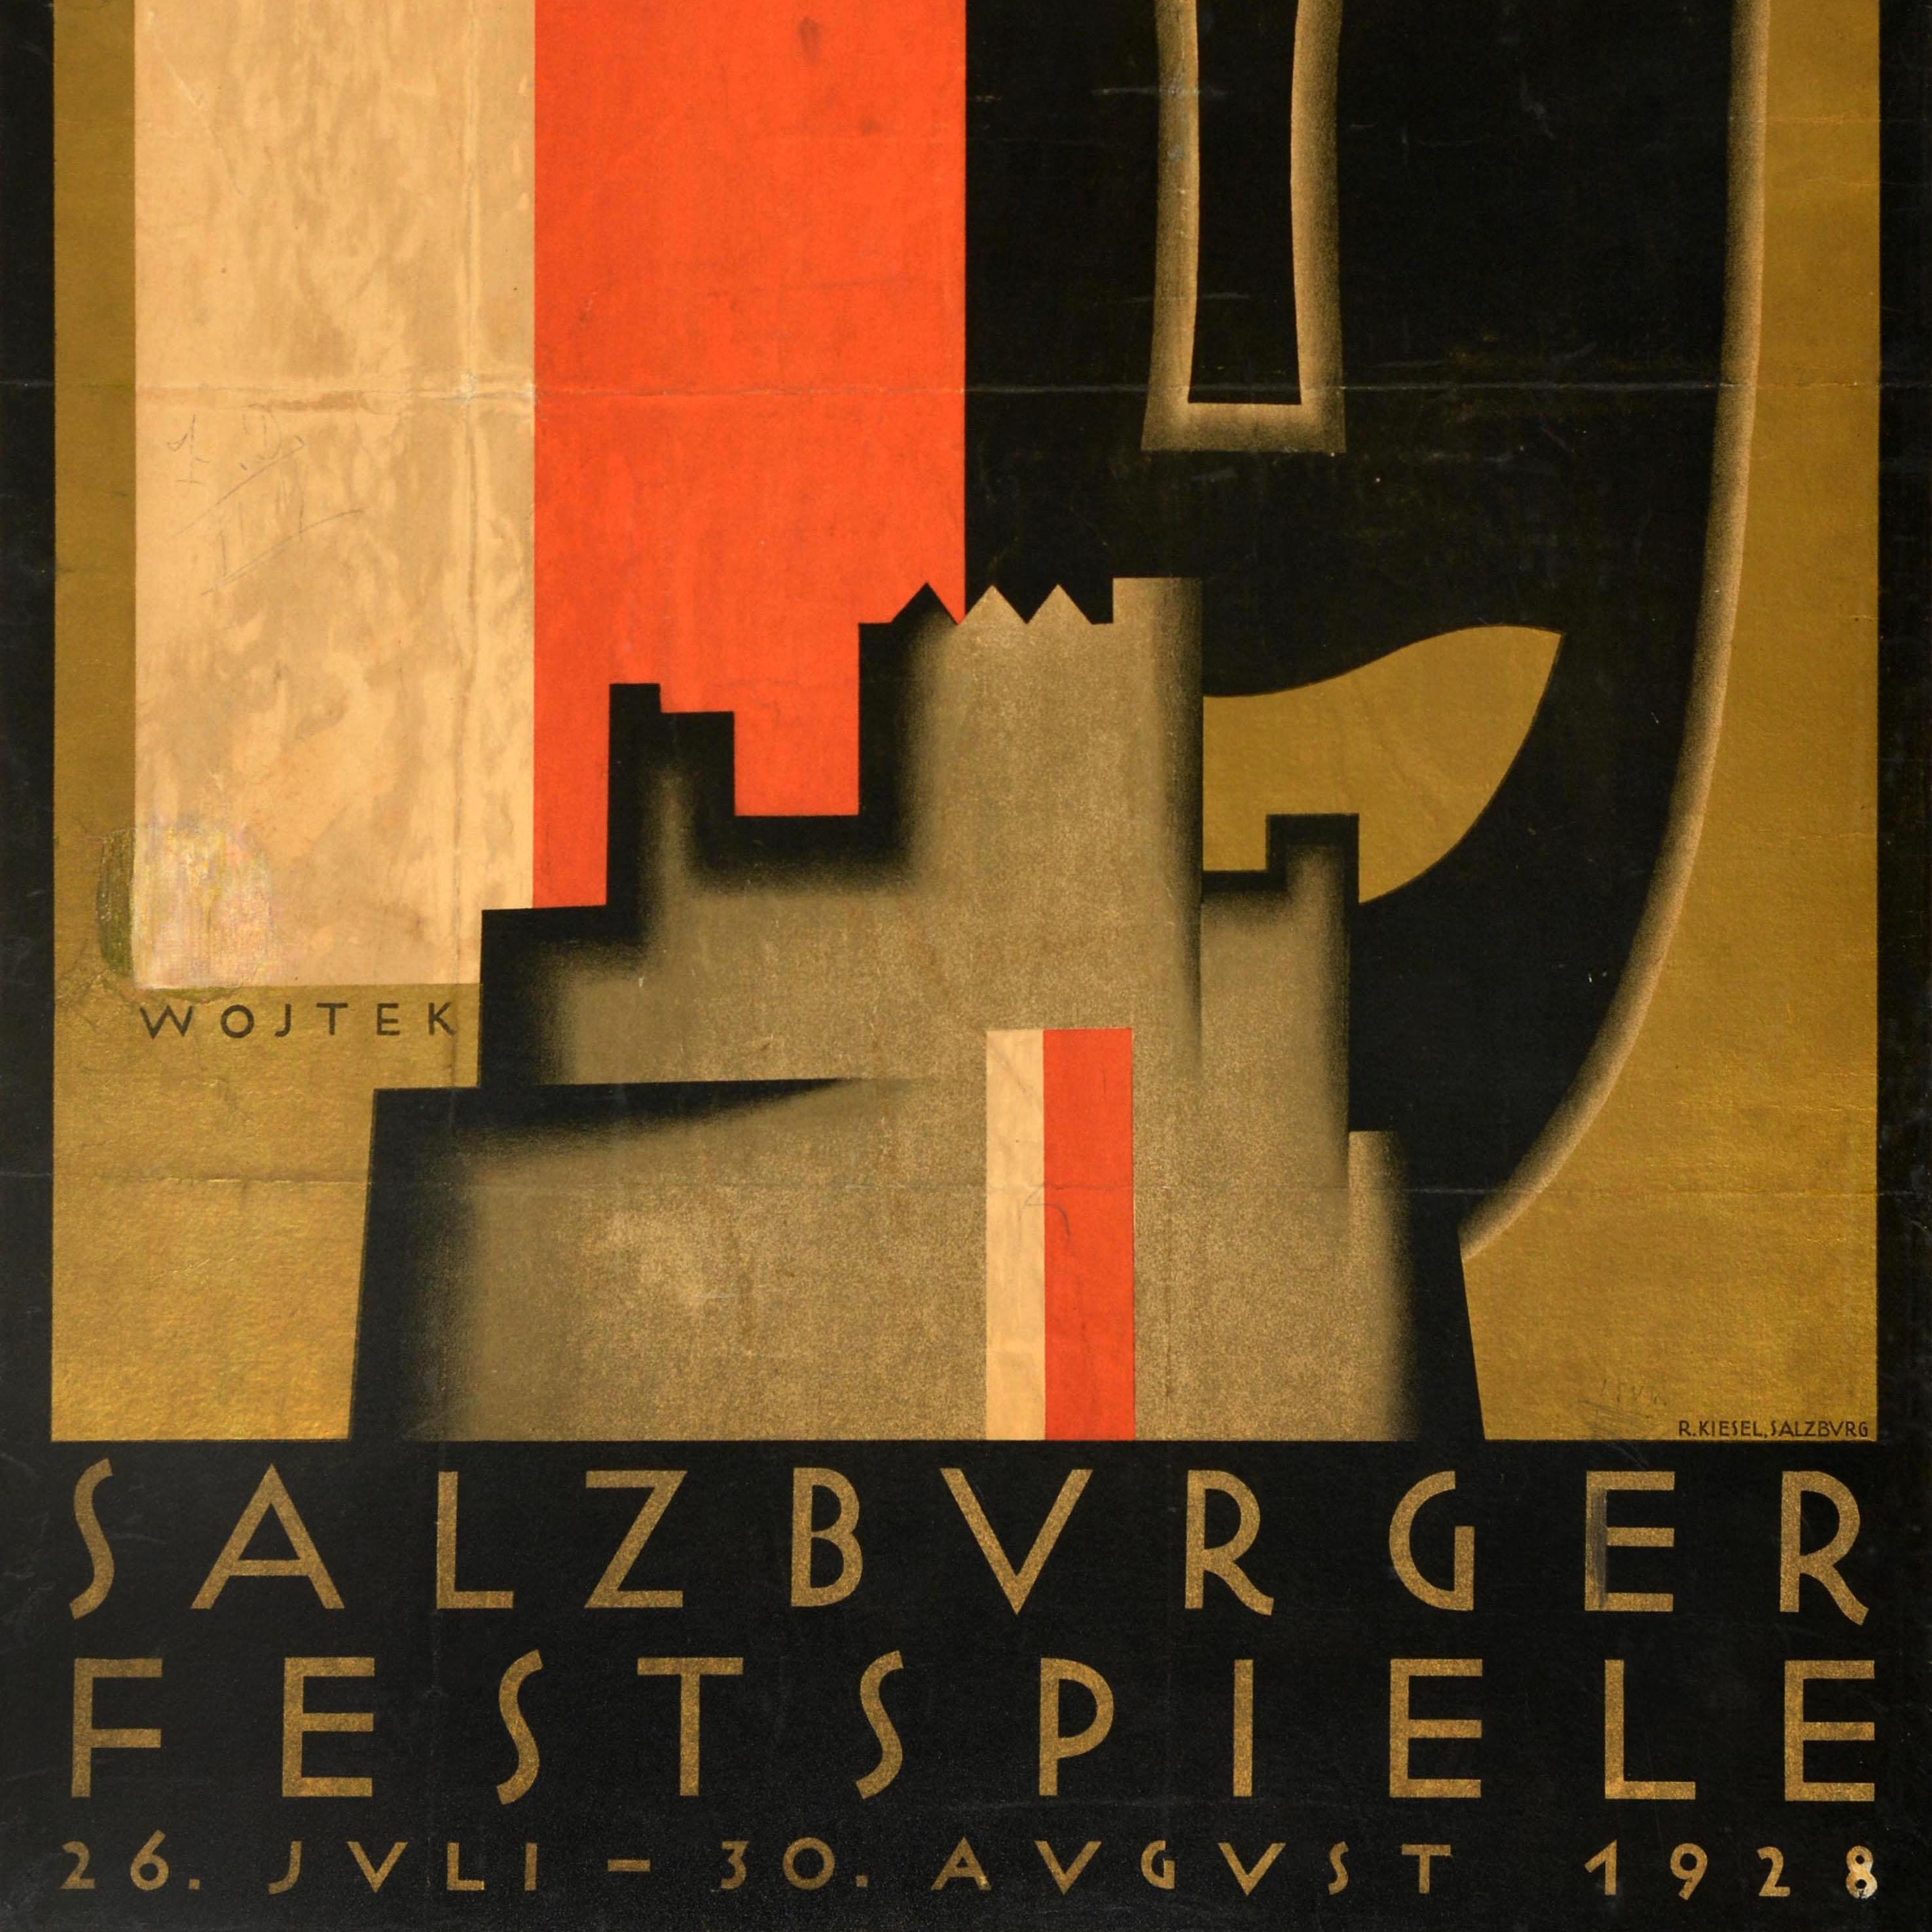 Original vintage advertising poster for the Salzburger Festspiele / Salzburg Festival from 26 July to 30 August 1928 under the management of Max Reinhardt, Franz Schalk and Bruno Walter, featuring a great design depicting an outline of a castle in